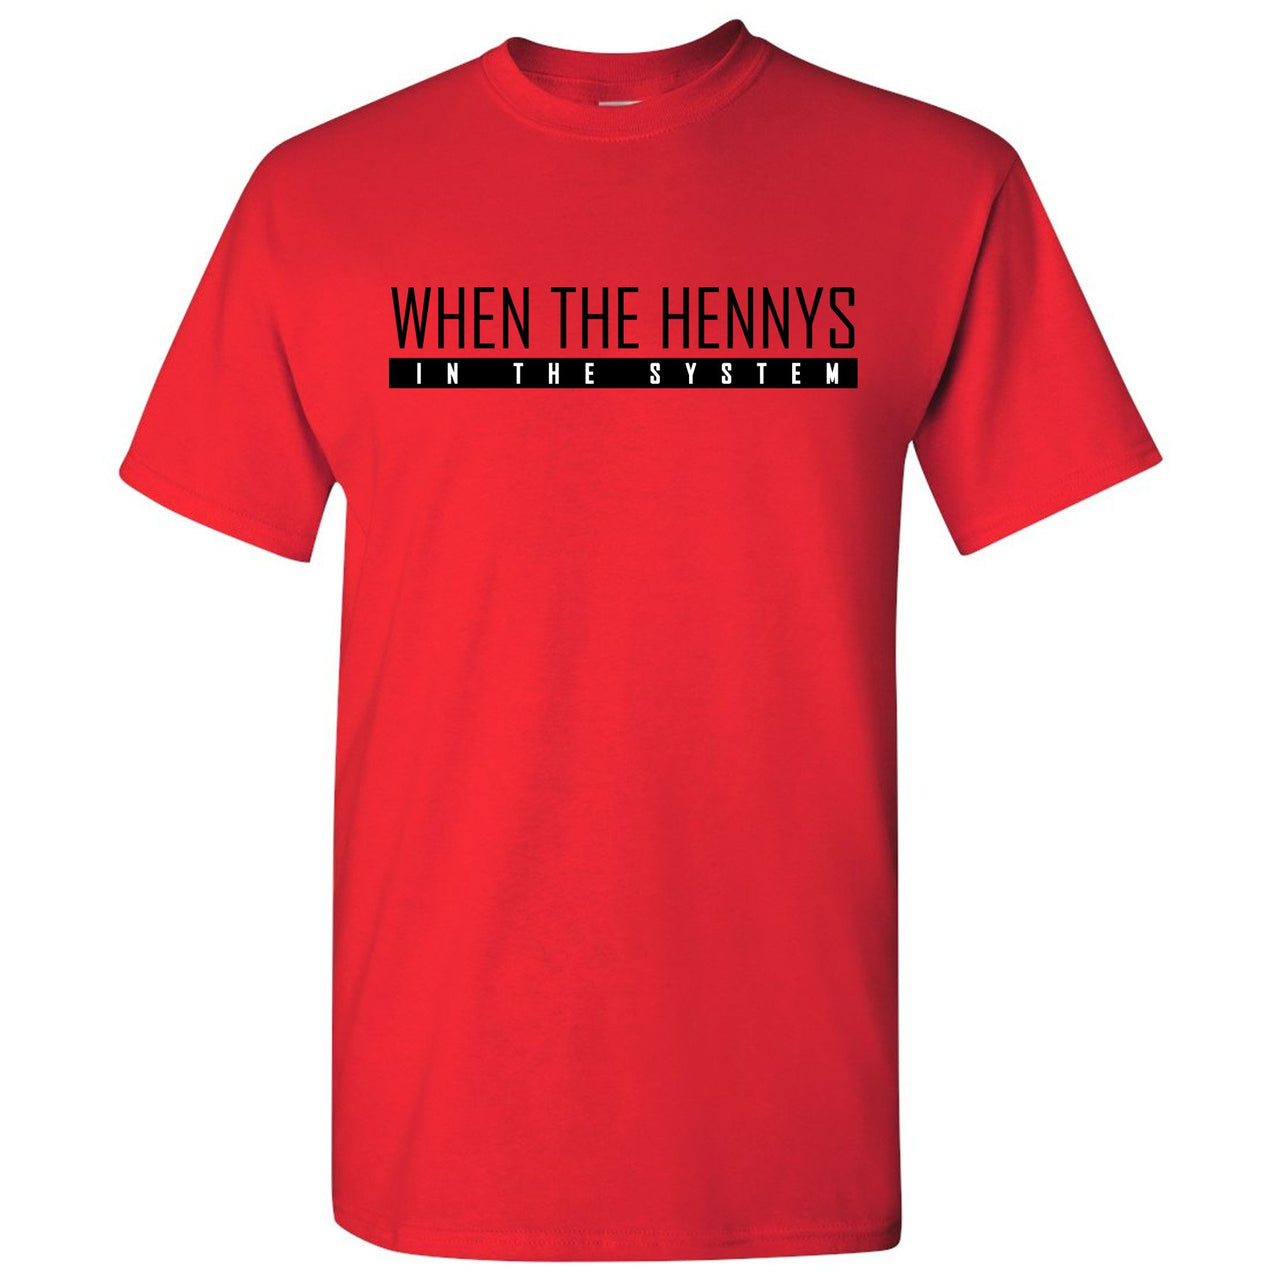 Bred 2019 4s T Shirt | When the Hennys, Red